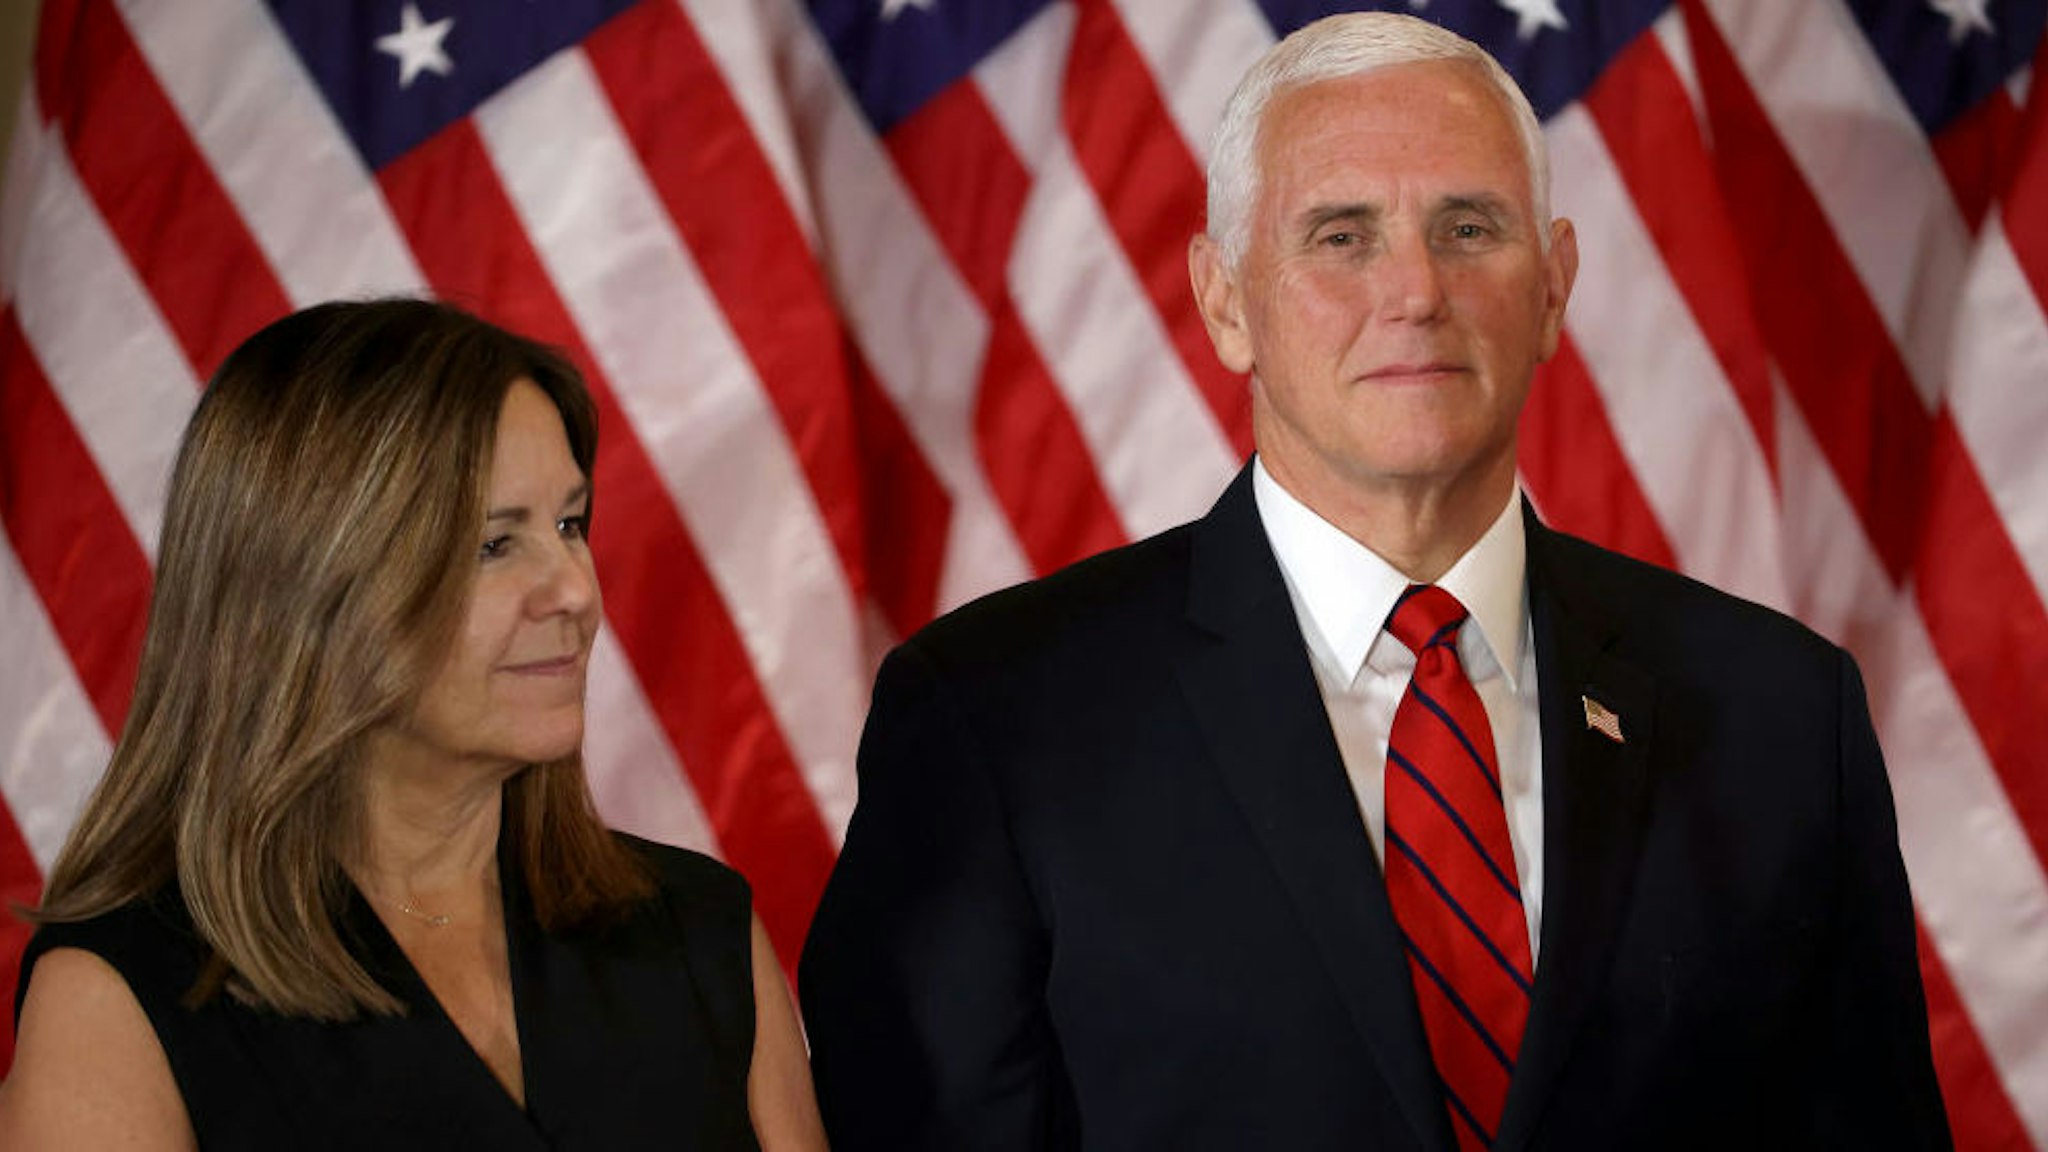 WASHINGTON, DC - NOVEMBER 04: Vice President Mike Pence and Karen Pence look on as U.S. President Donald Trump speaks on election night in the East Room of the White House in the early morning hours of November 04, 2020 in Washington, DC. Trump spoke shortly after 2am with the presidential race against Democratic presidential nominee Joe Biden still too close to call.